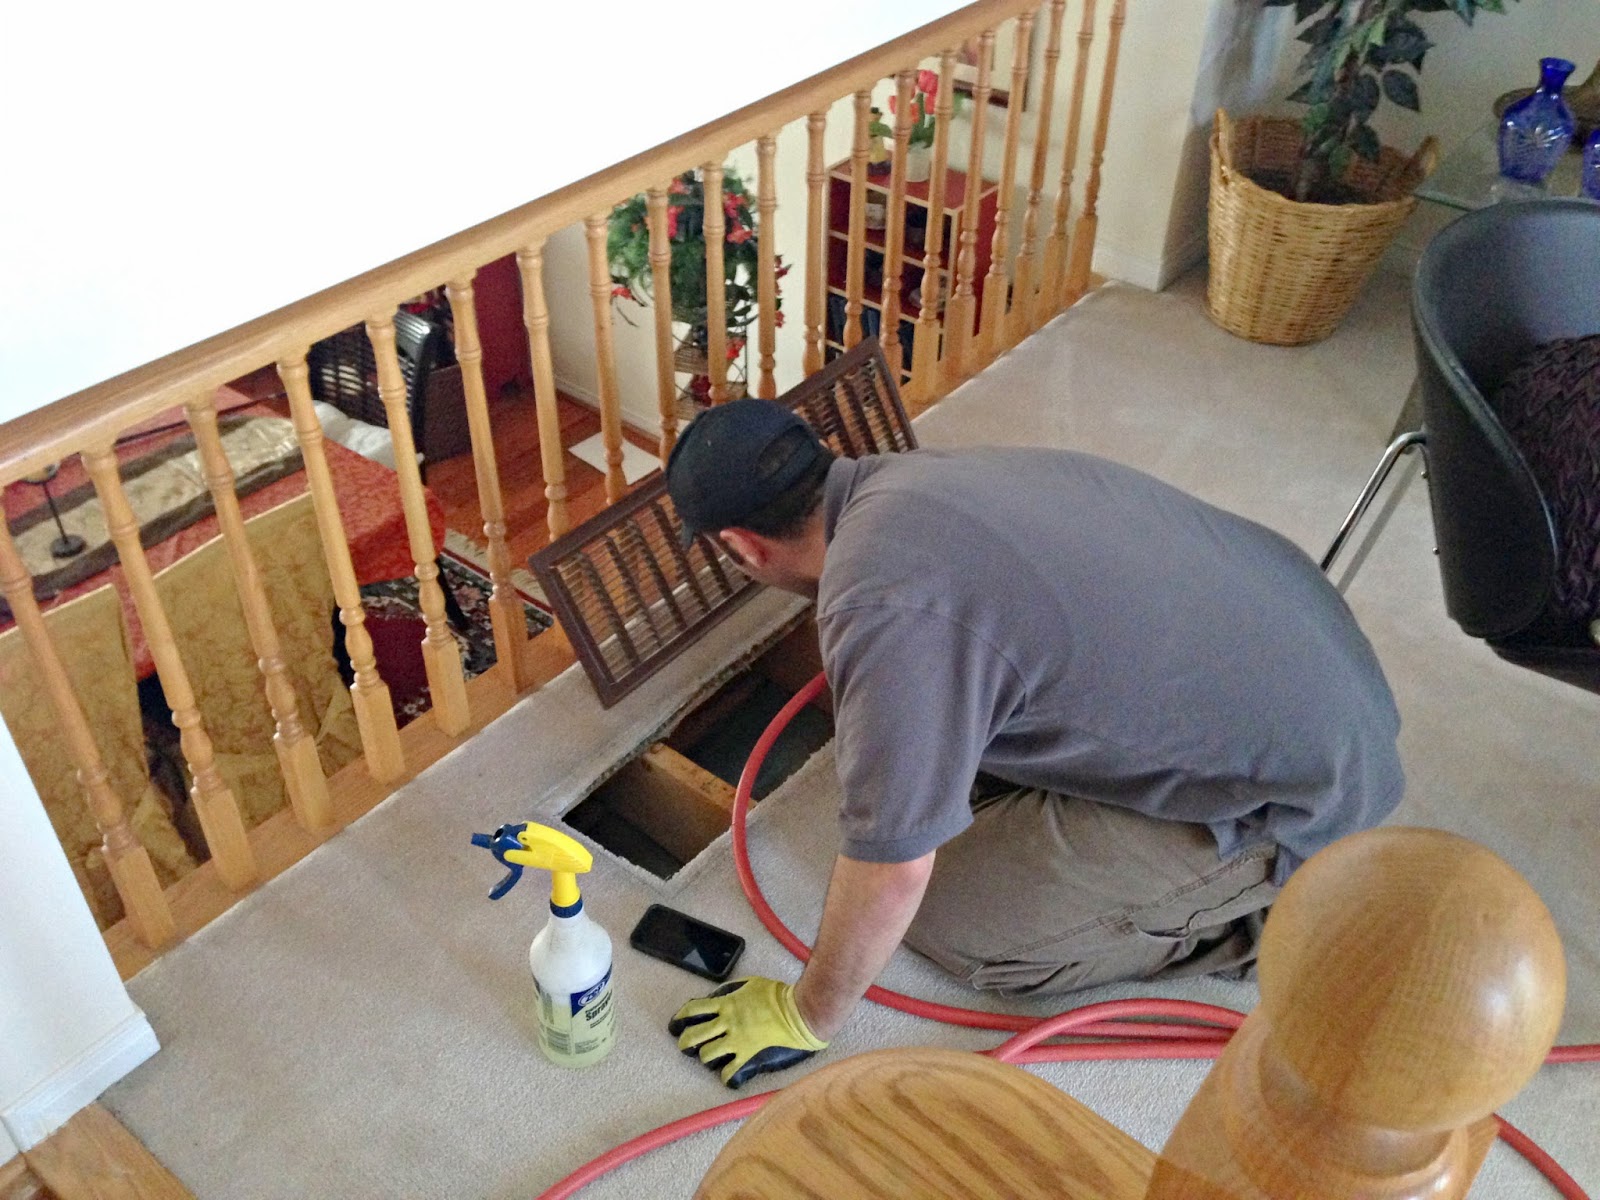 Ducted Heating Cleaning Melbourne